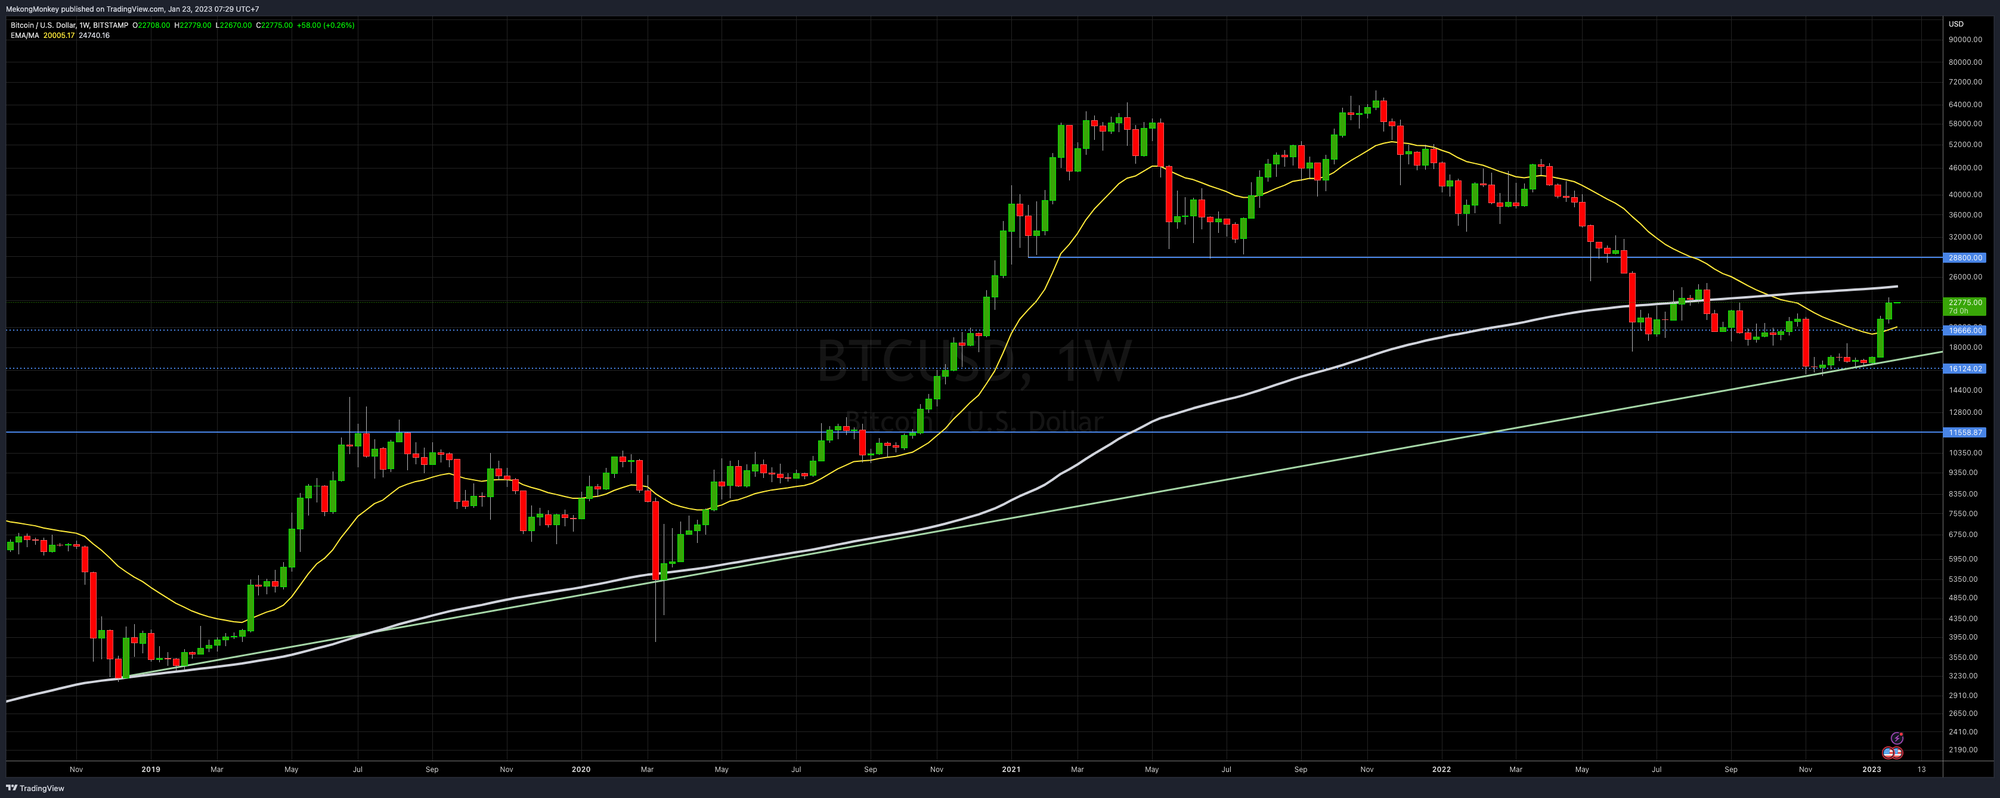 The weekly chart of BTCUSD with the 21 EMA (yellow) and the 200 SMA (white).